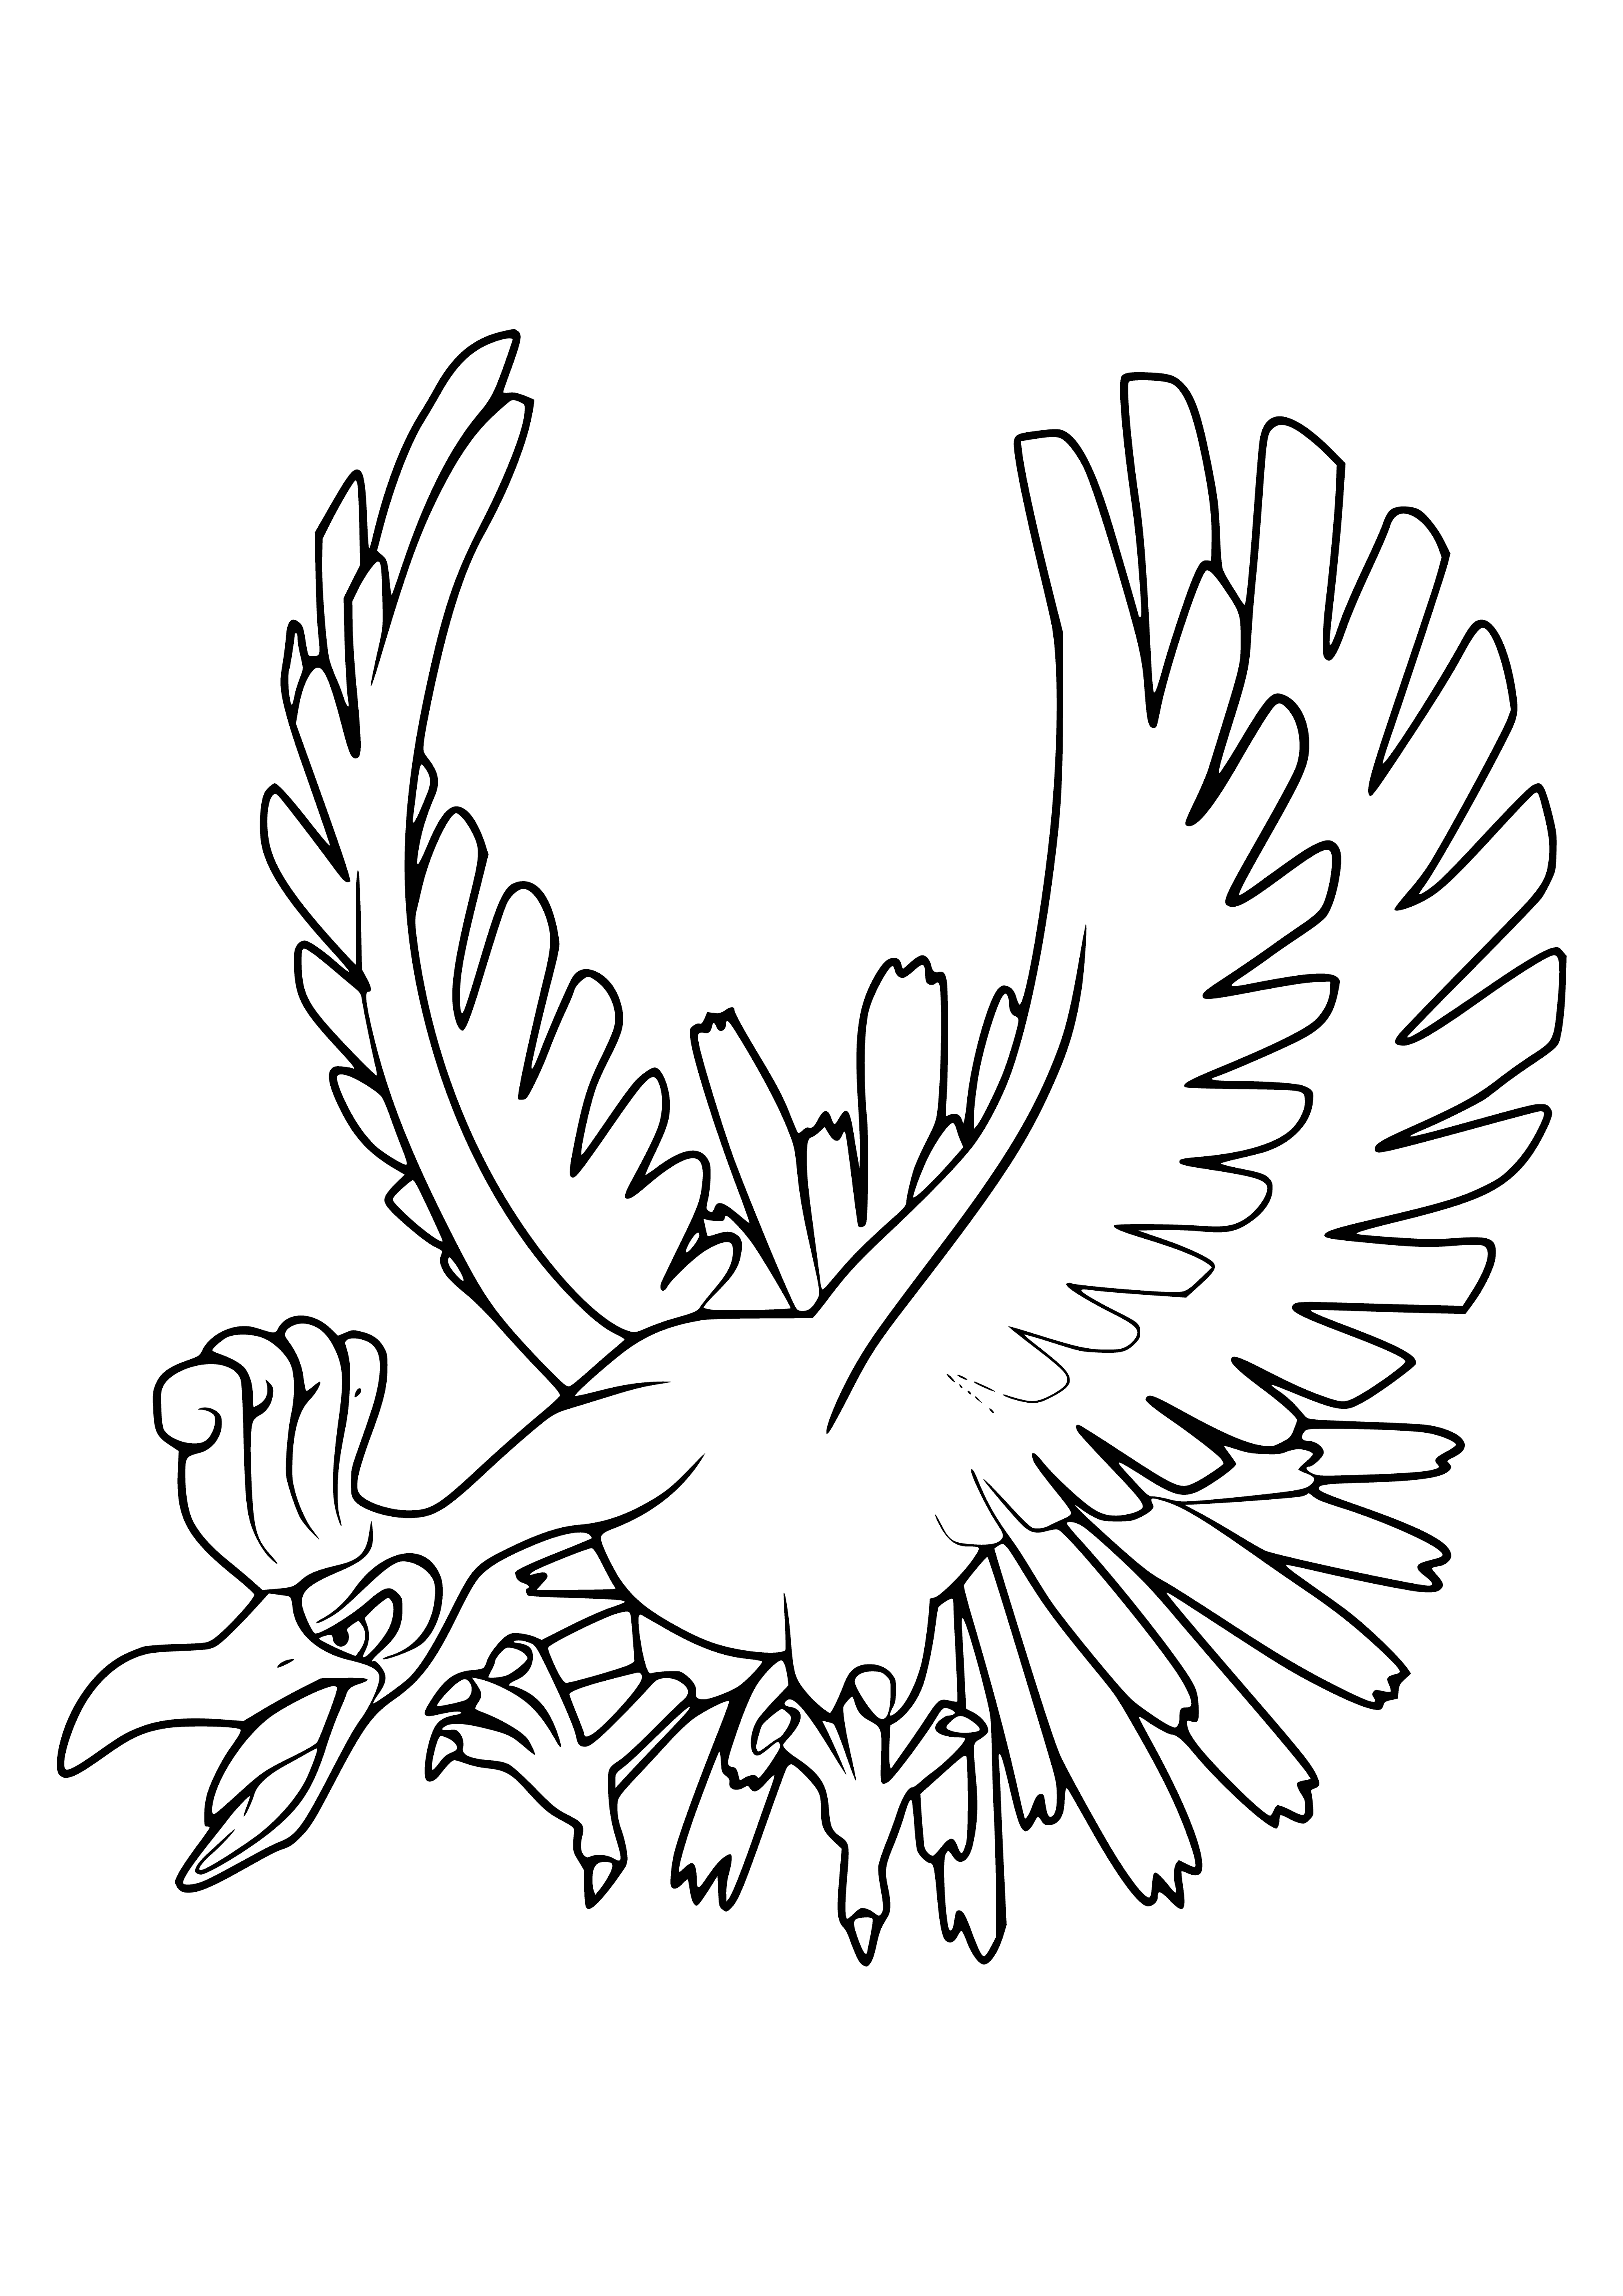 coloring page: Ho-Oh is an ancient mythical guardian of legendary Pokémon, Lugia, known for its golden body, red breast, long neck and tail, beak, and feather-like streamers. It bears a circular crest atop its head.